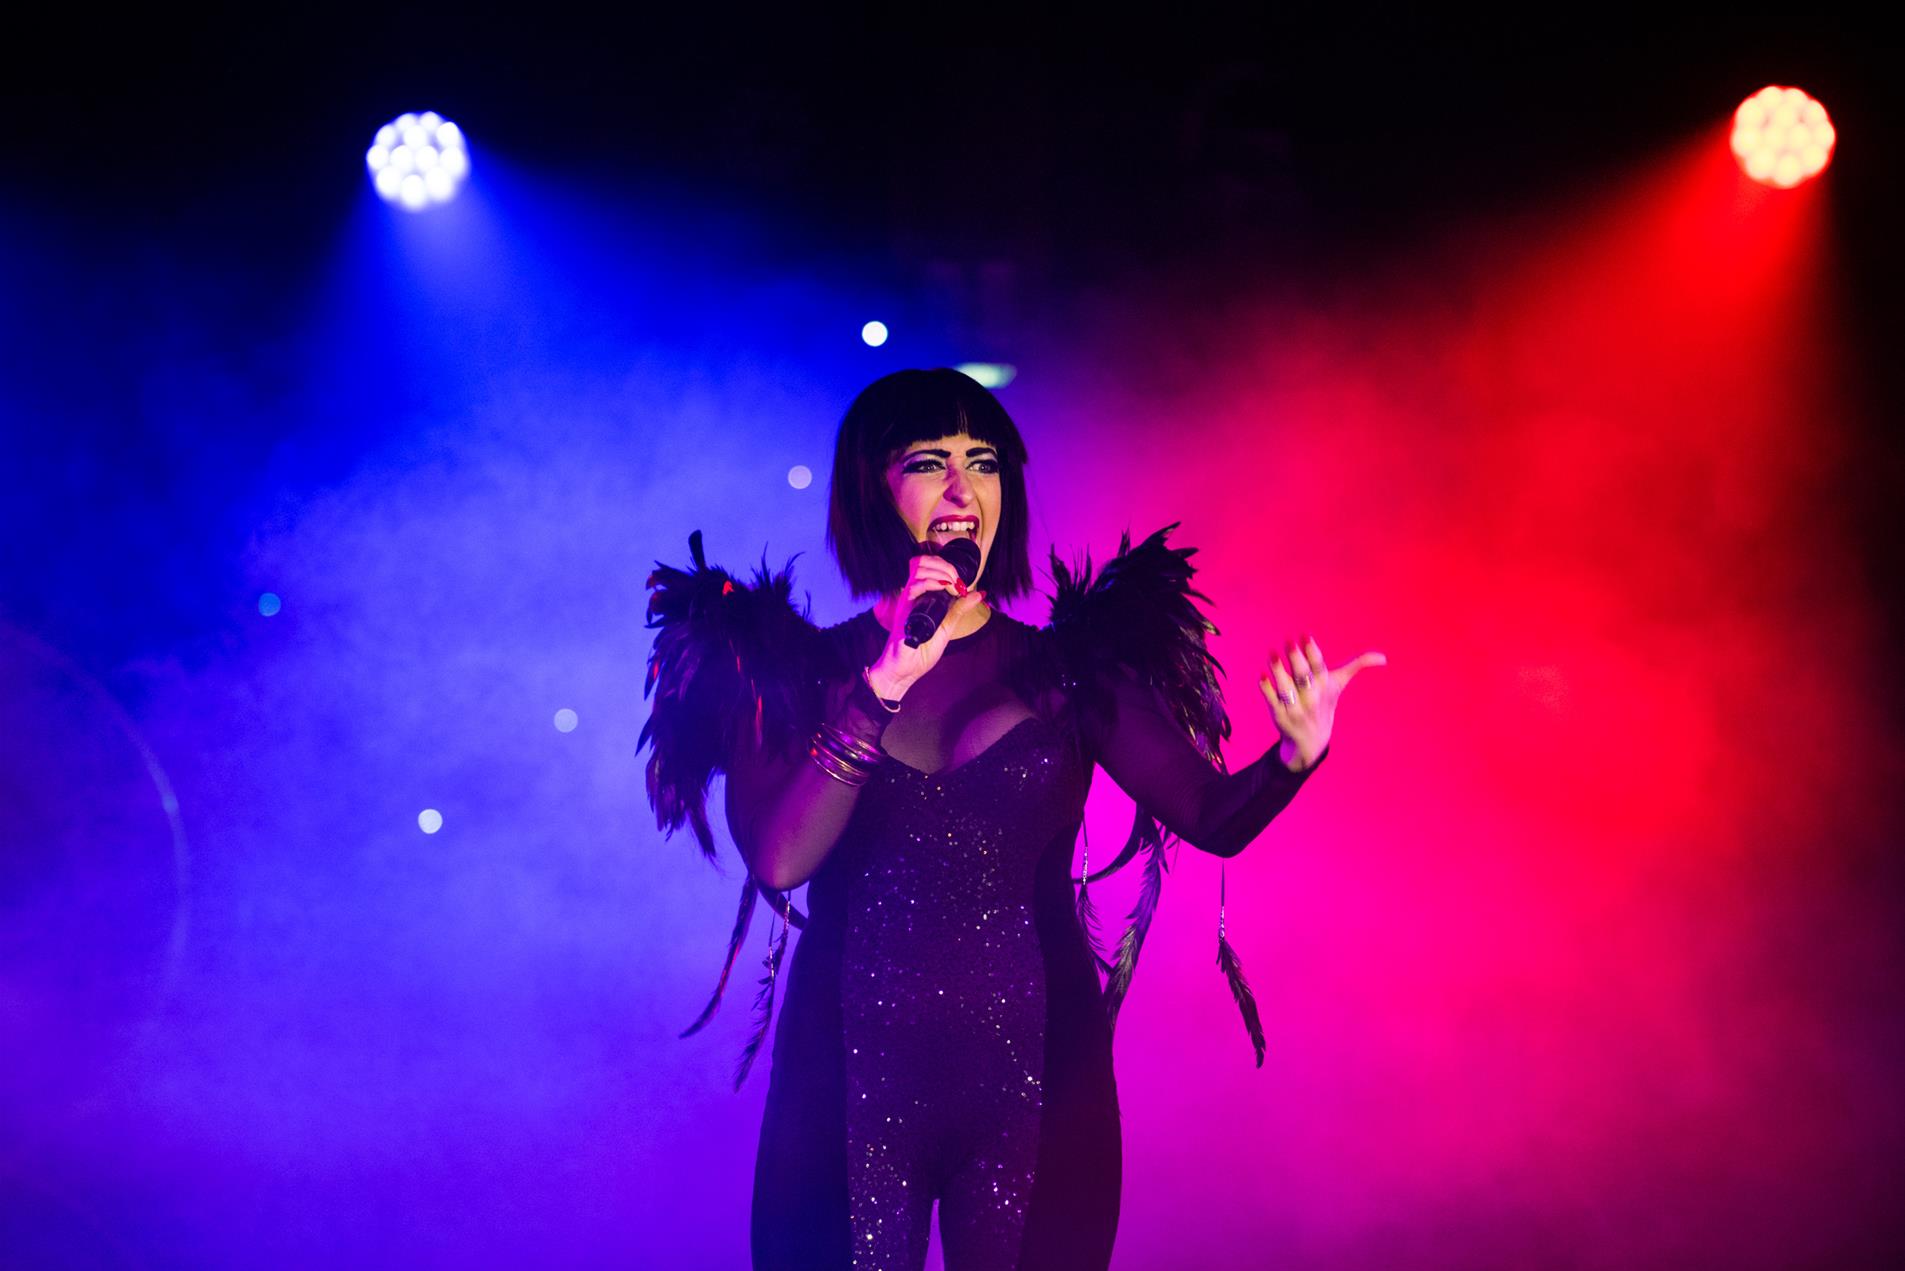 Performer in a black body suit singing on stage.